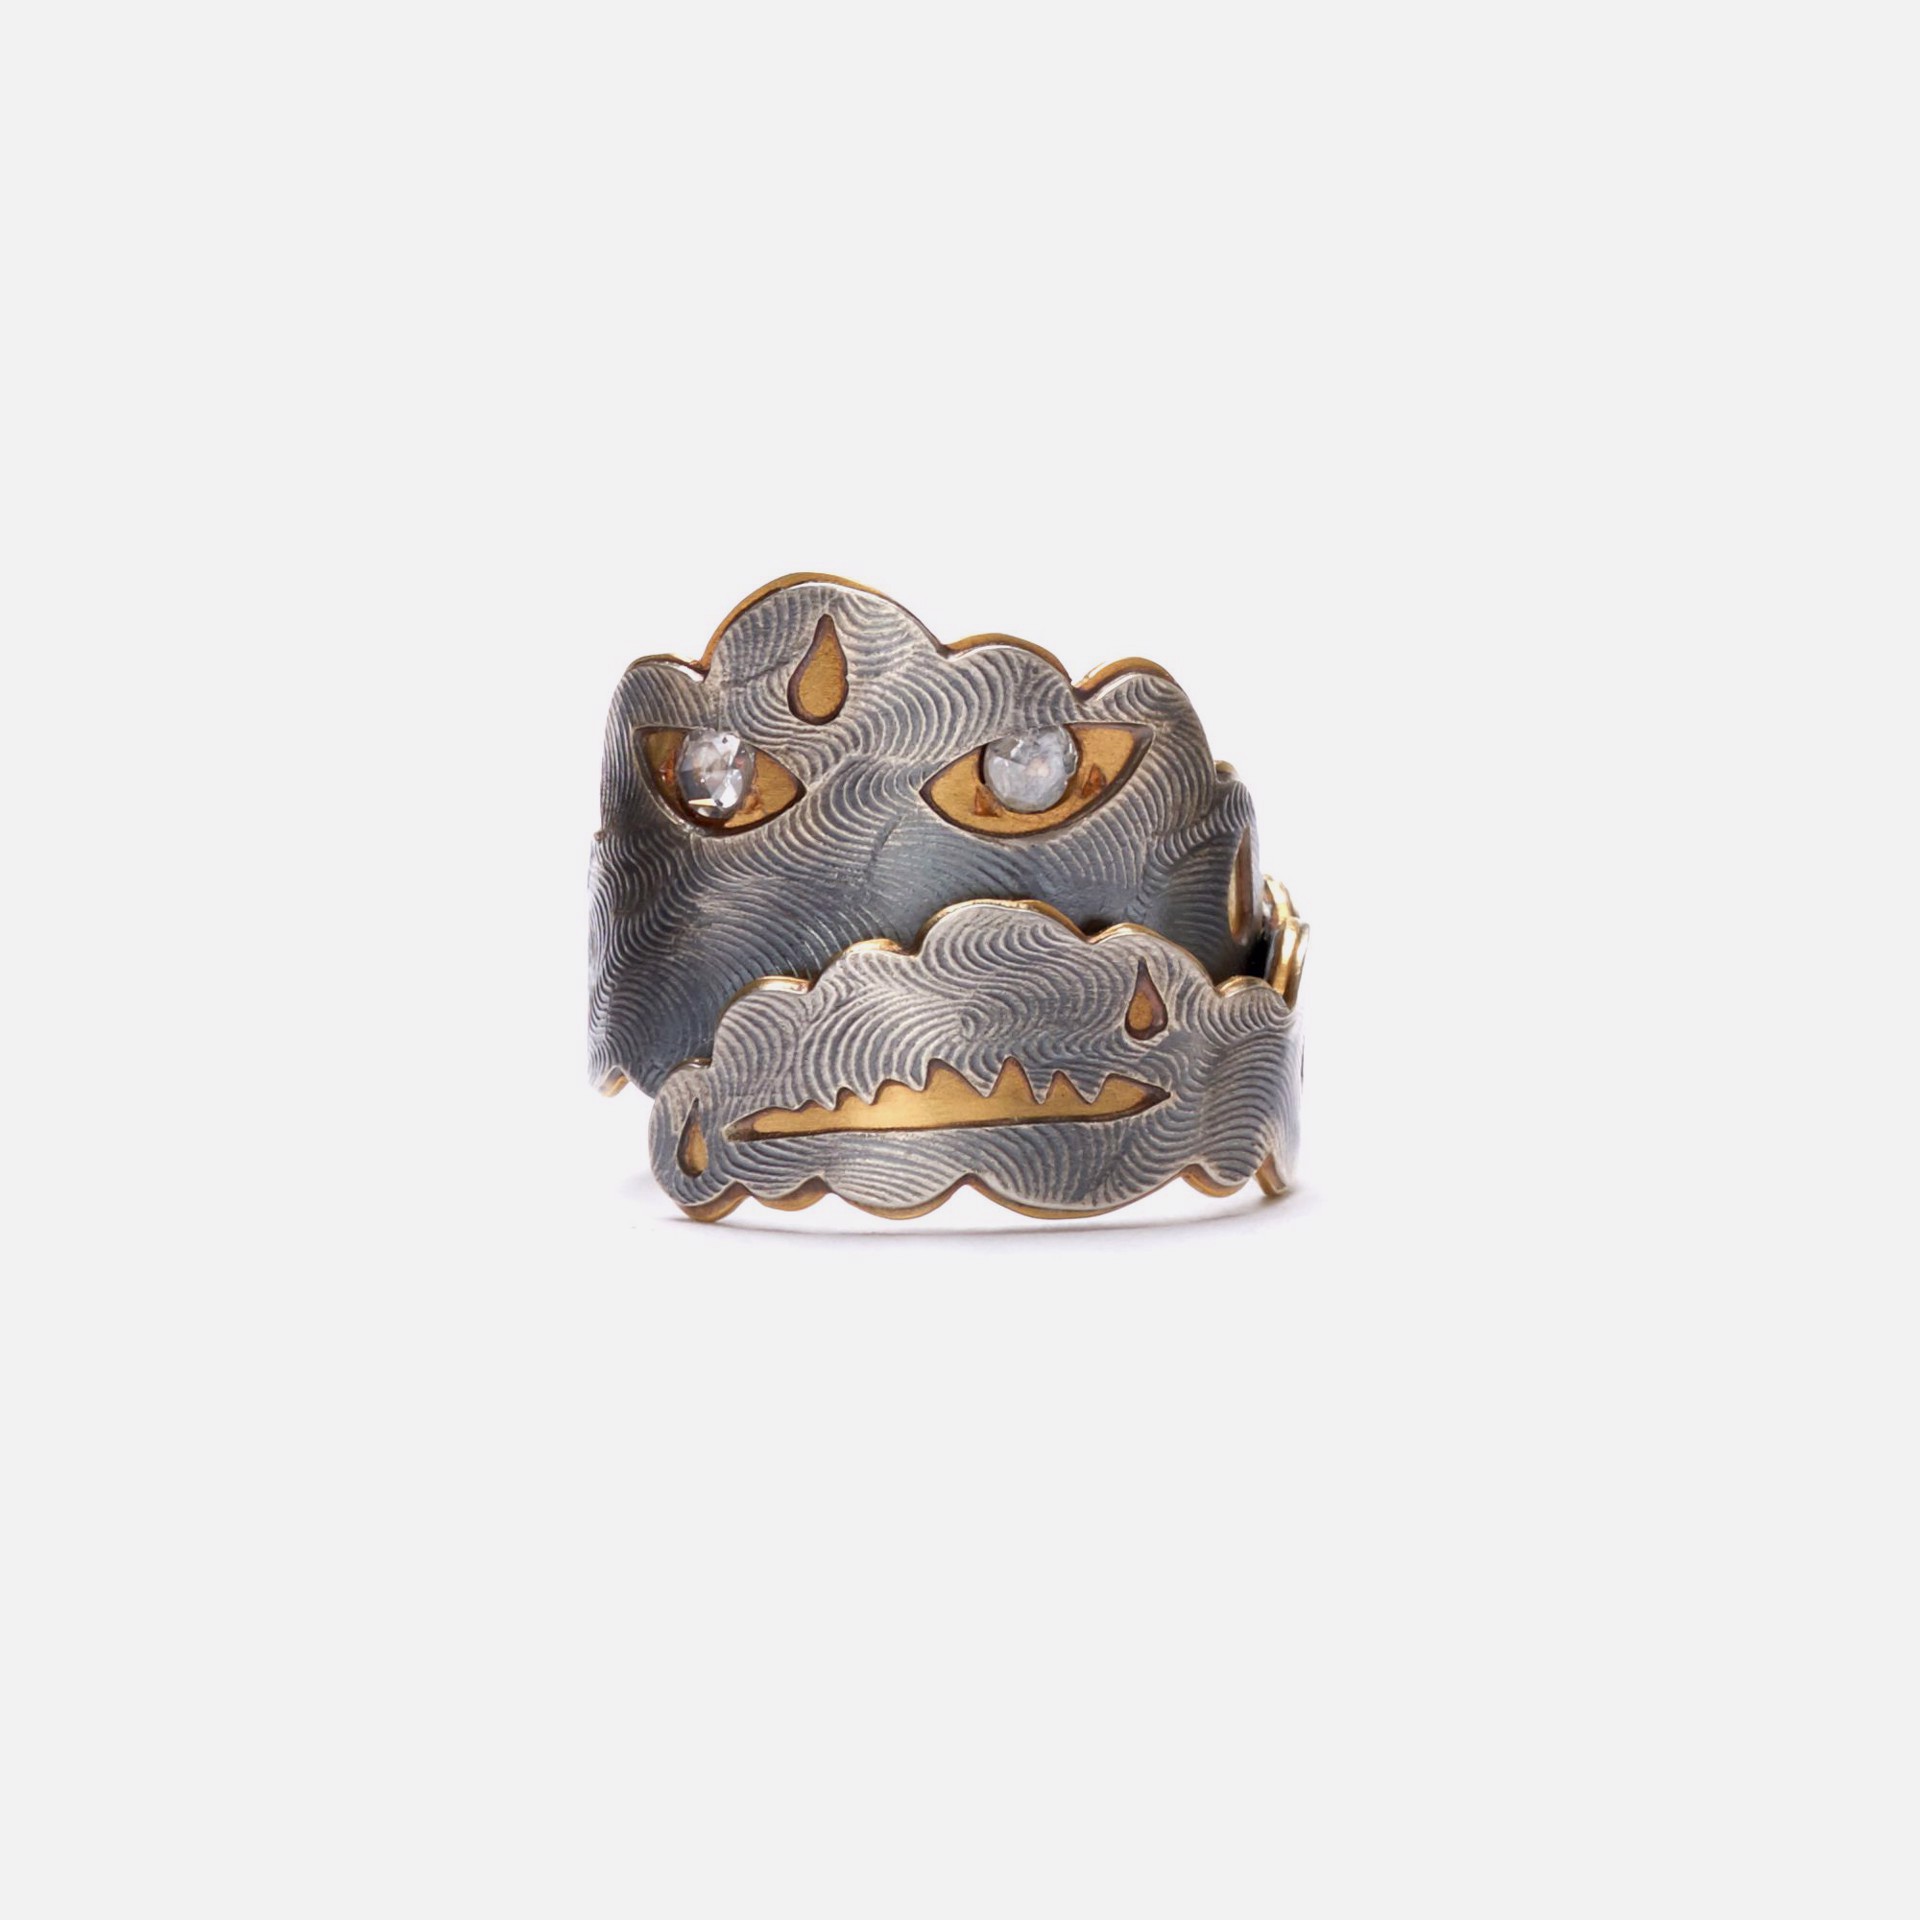 Cranky Cloud Ring by Helen Britton